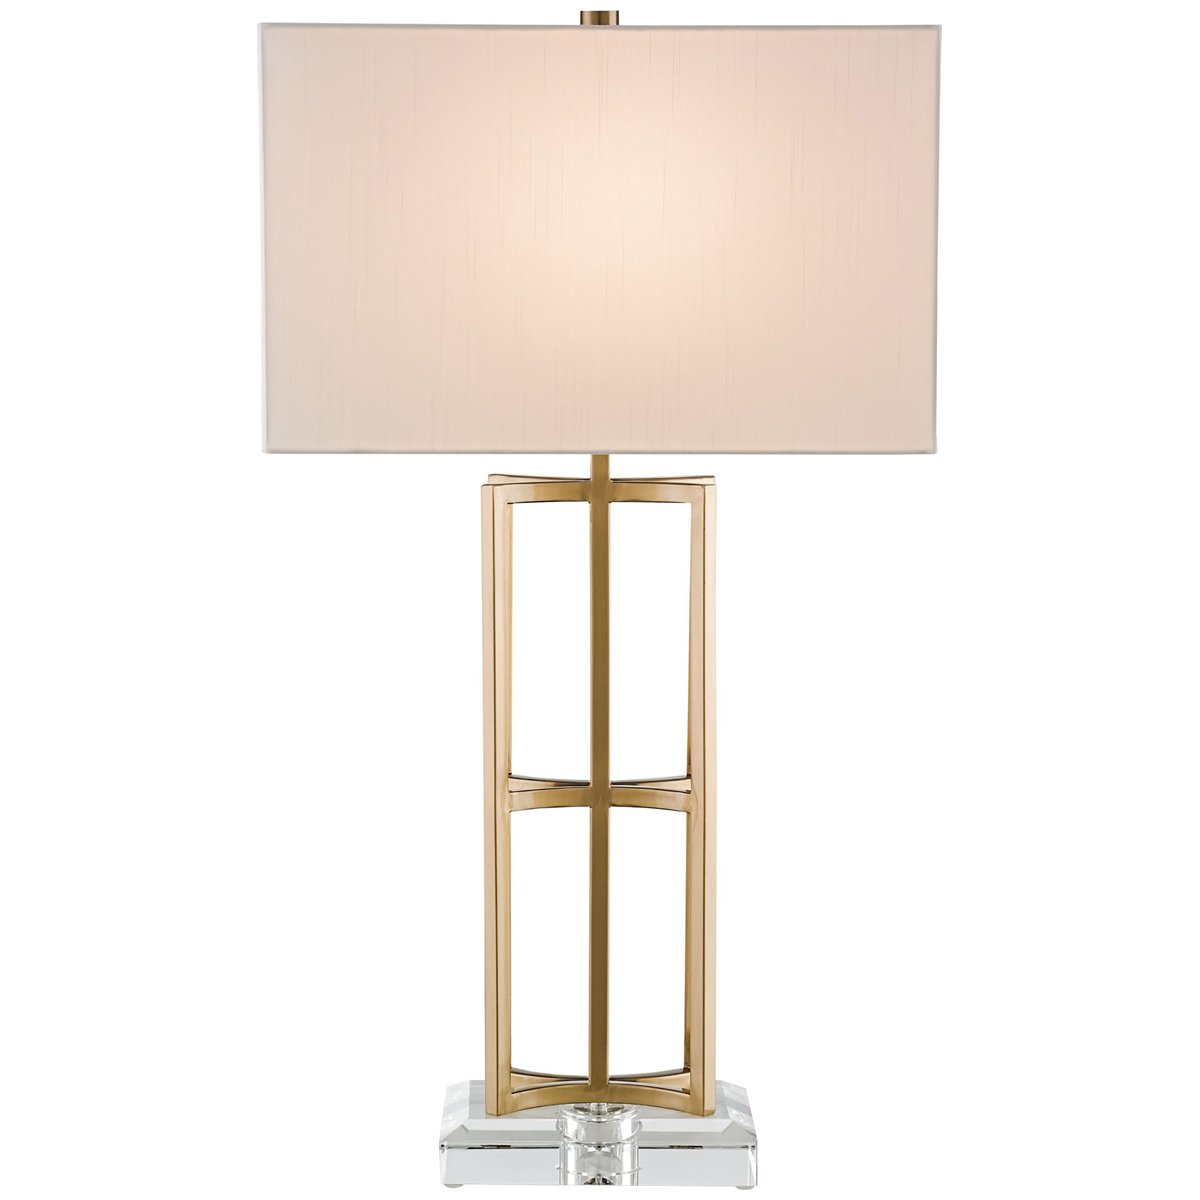 Currey and Company Devonside Table Lamp